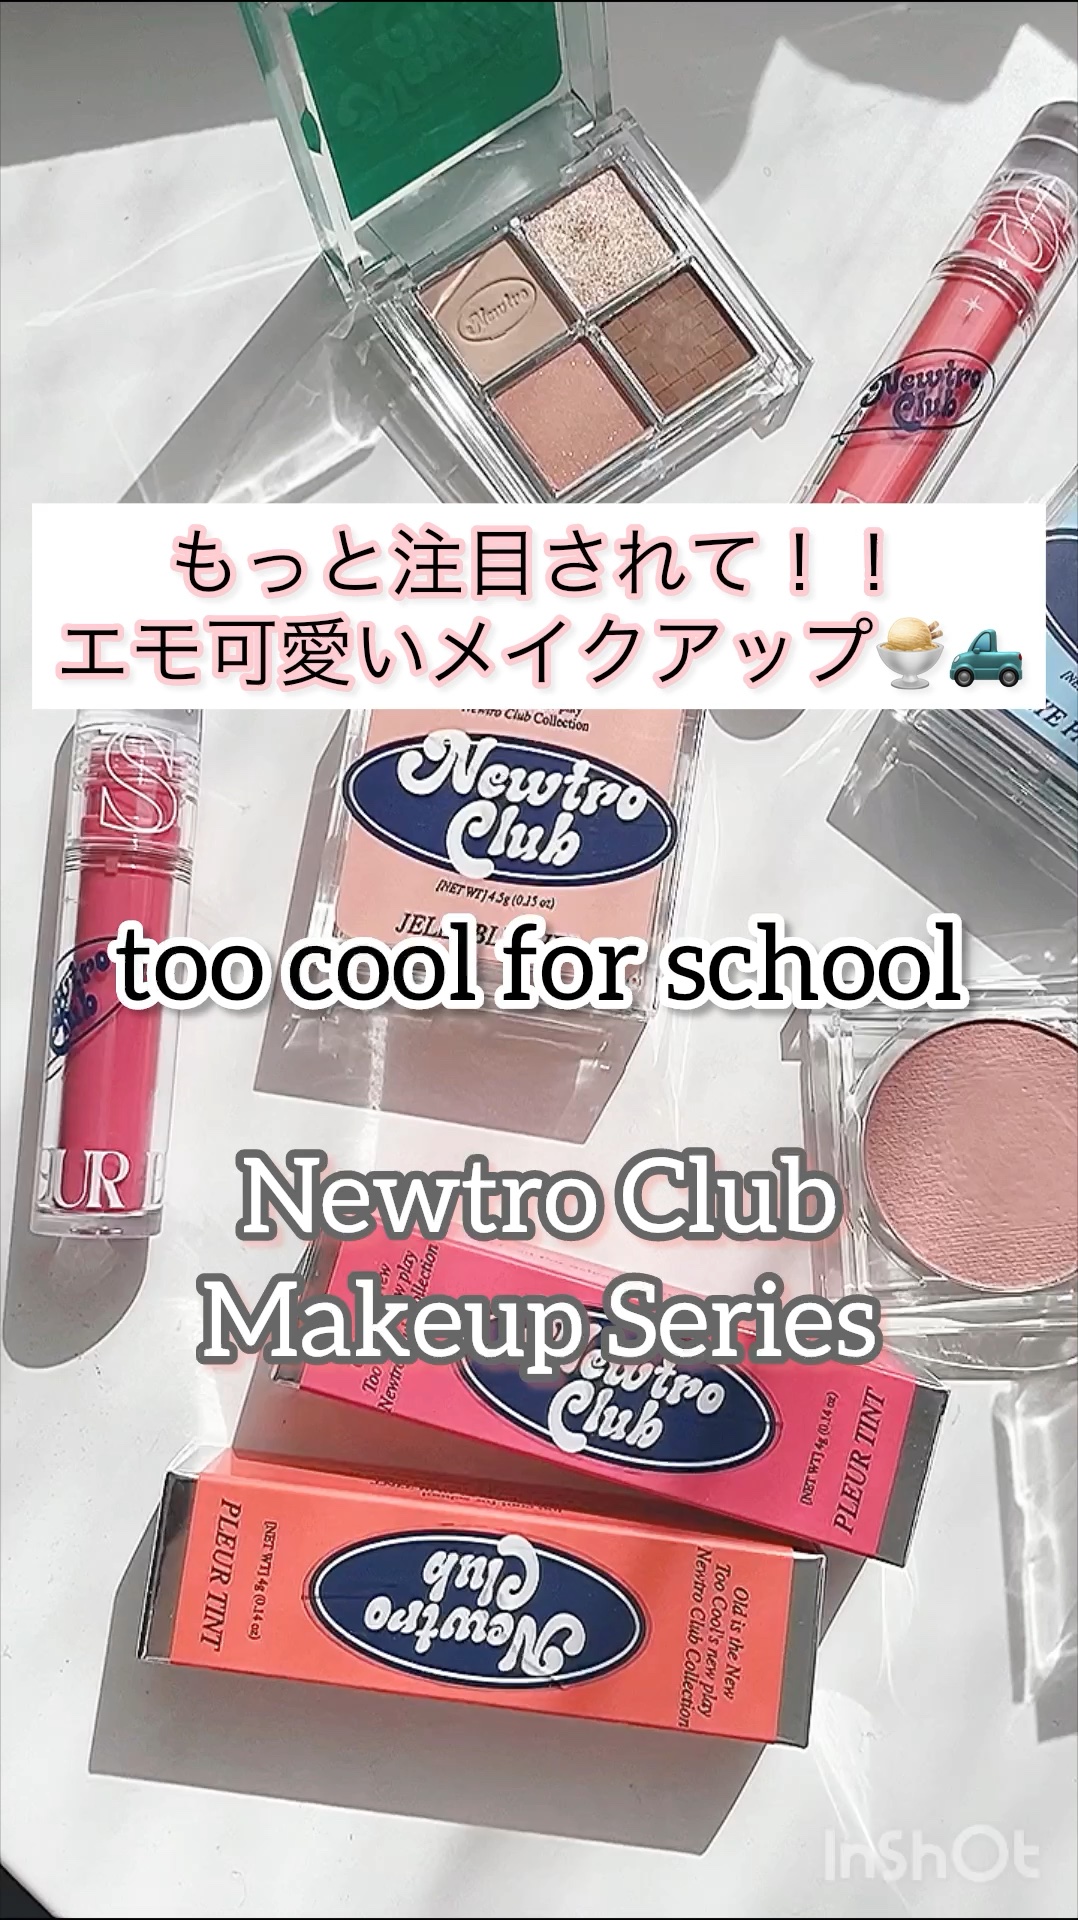 NEWTRO CLUB EYE PALETTE｜too cool for schoolを使った口コミ もっと注目されてほしいtoo cool  for schoolの新作！ by Paris♡パリス(乾燥肌/20代後半) LIPS